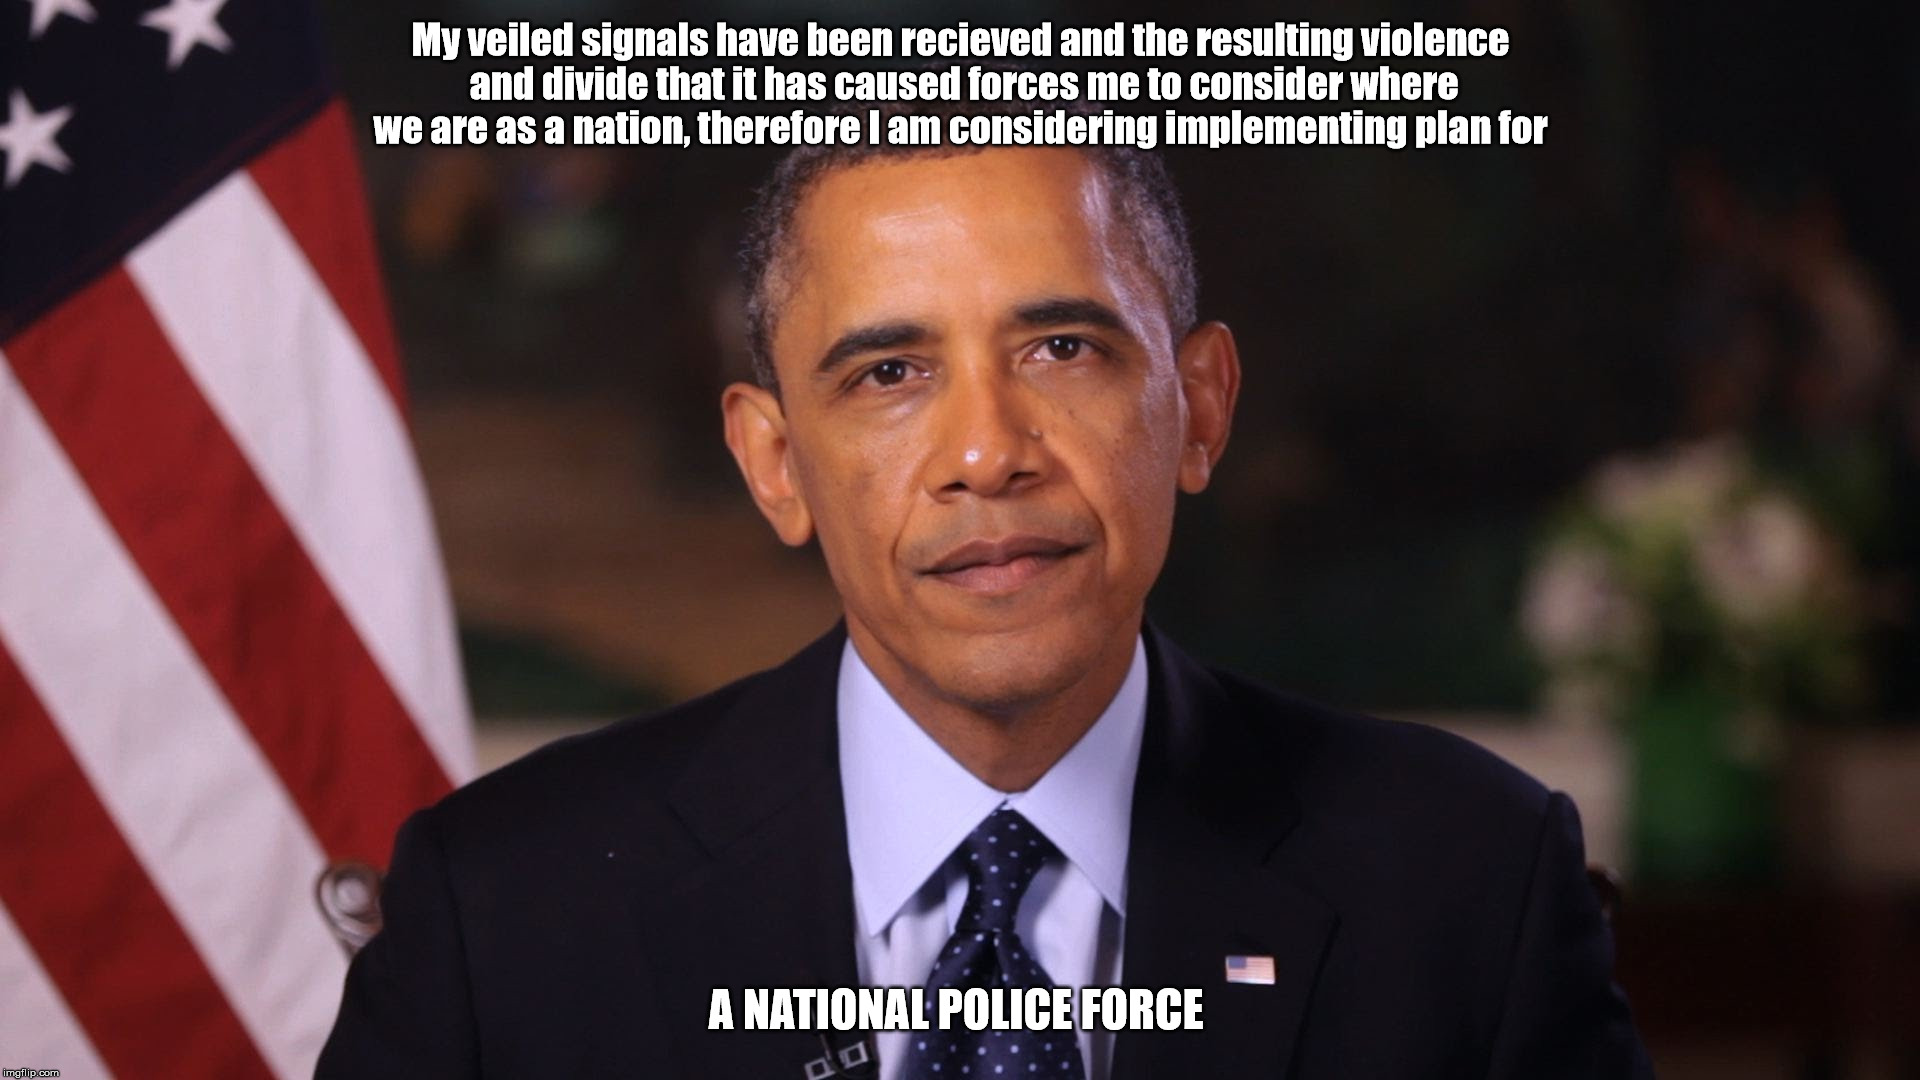 Irritated Obama | My veiled signals have been recieved and the resulting violence and divide that it has caused forces me to consider where we are as a nation, therefore I am considering implementing plan for; A NATIONAL POLICE FORCE | image tagged in irritated obama | made w/ Imgflip meme maker